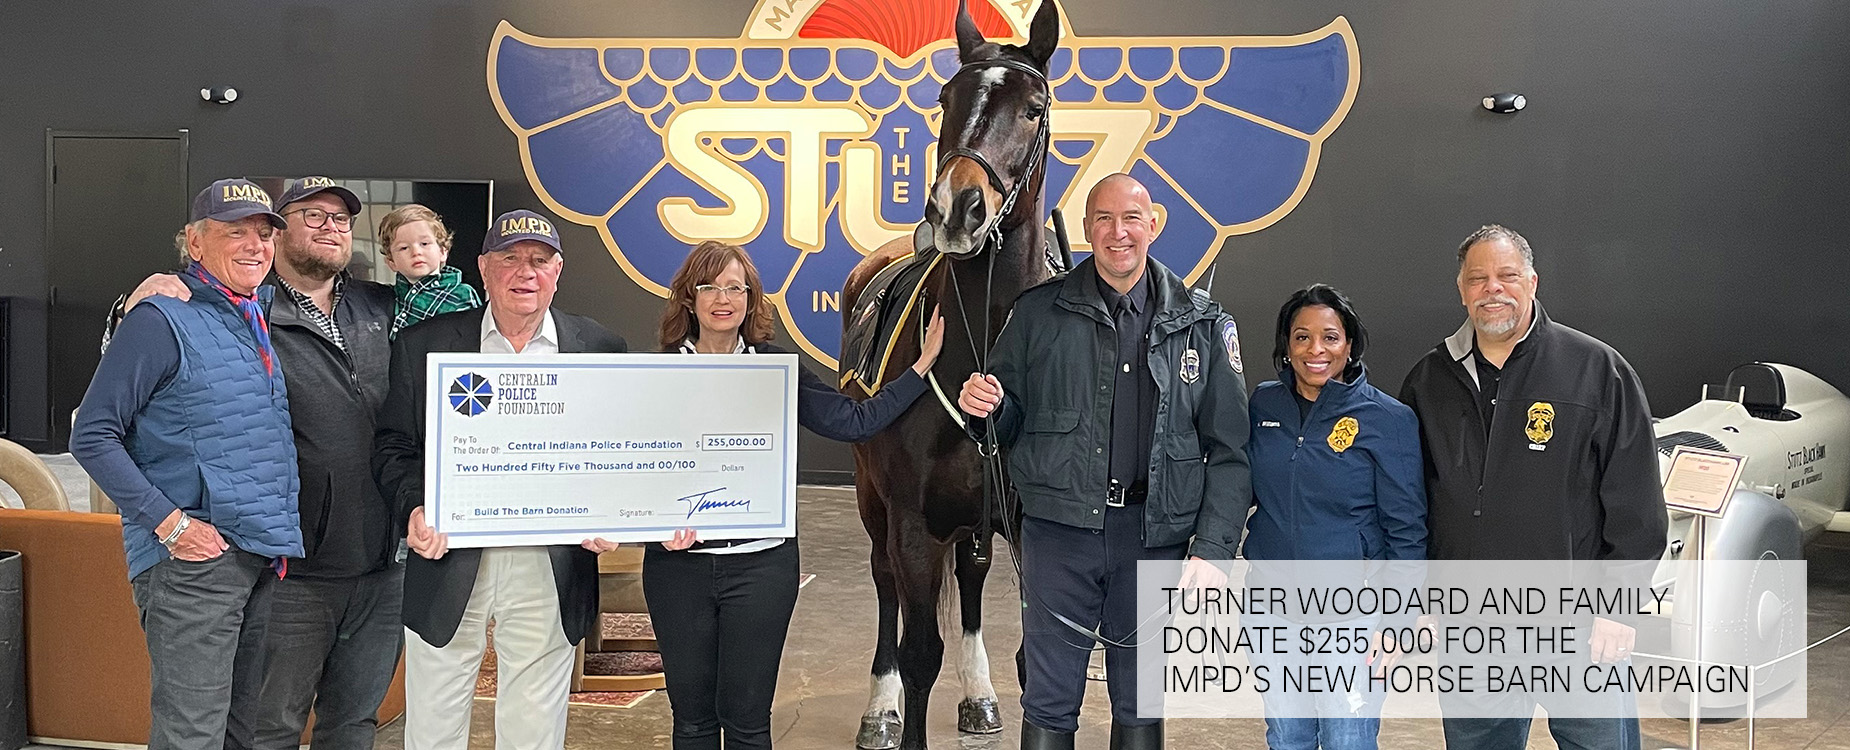 TTurner Woodard And Family Donate $255,000 For The Indianapolis Metropolitan Police Department Mounted Patrol’s New Horse Barn Campaign